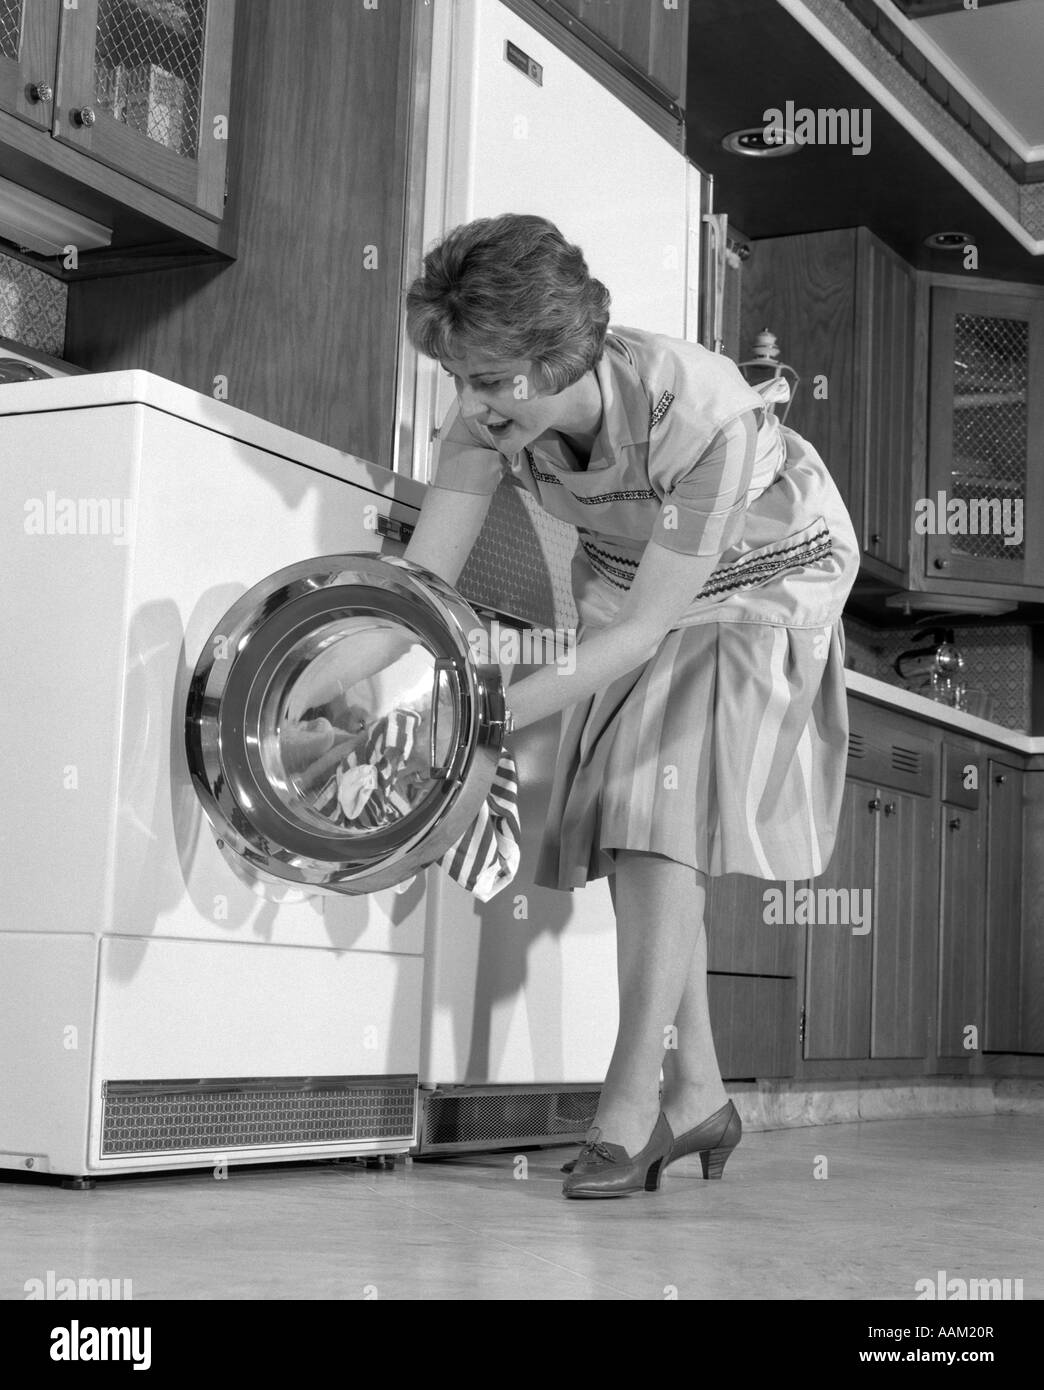 1960s HOUSEWIFE IN KITCHEN PUTTING LAUNDRY INTO WASHER Stock Photo